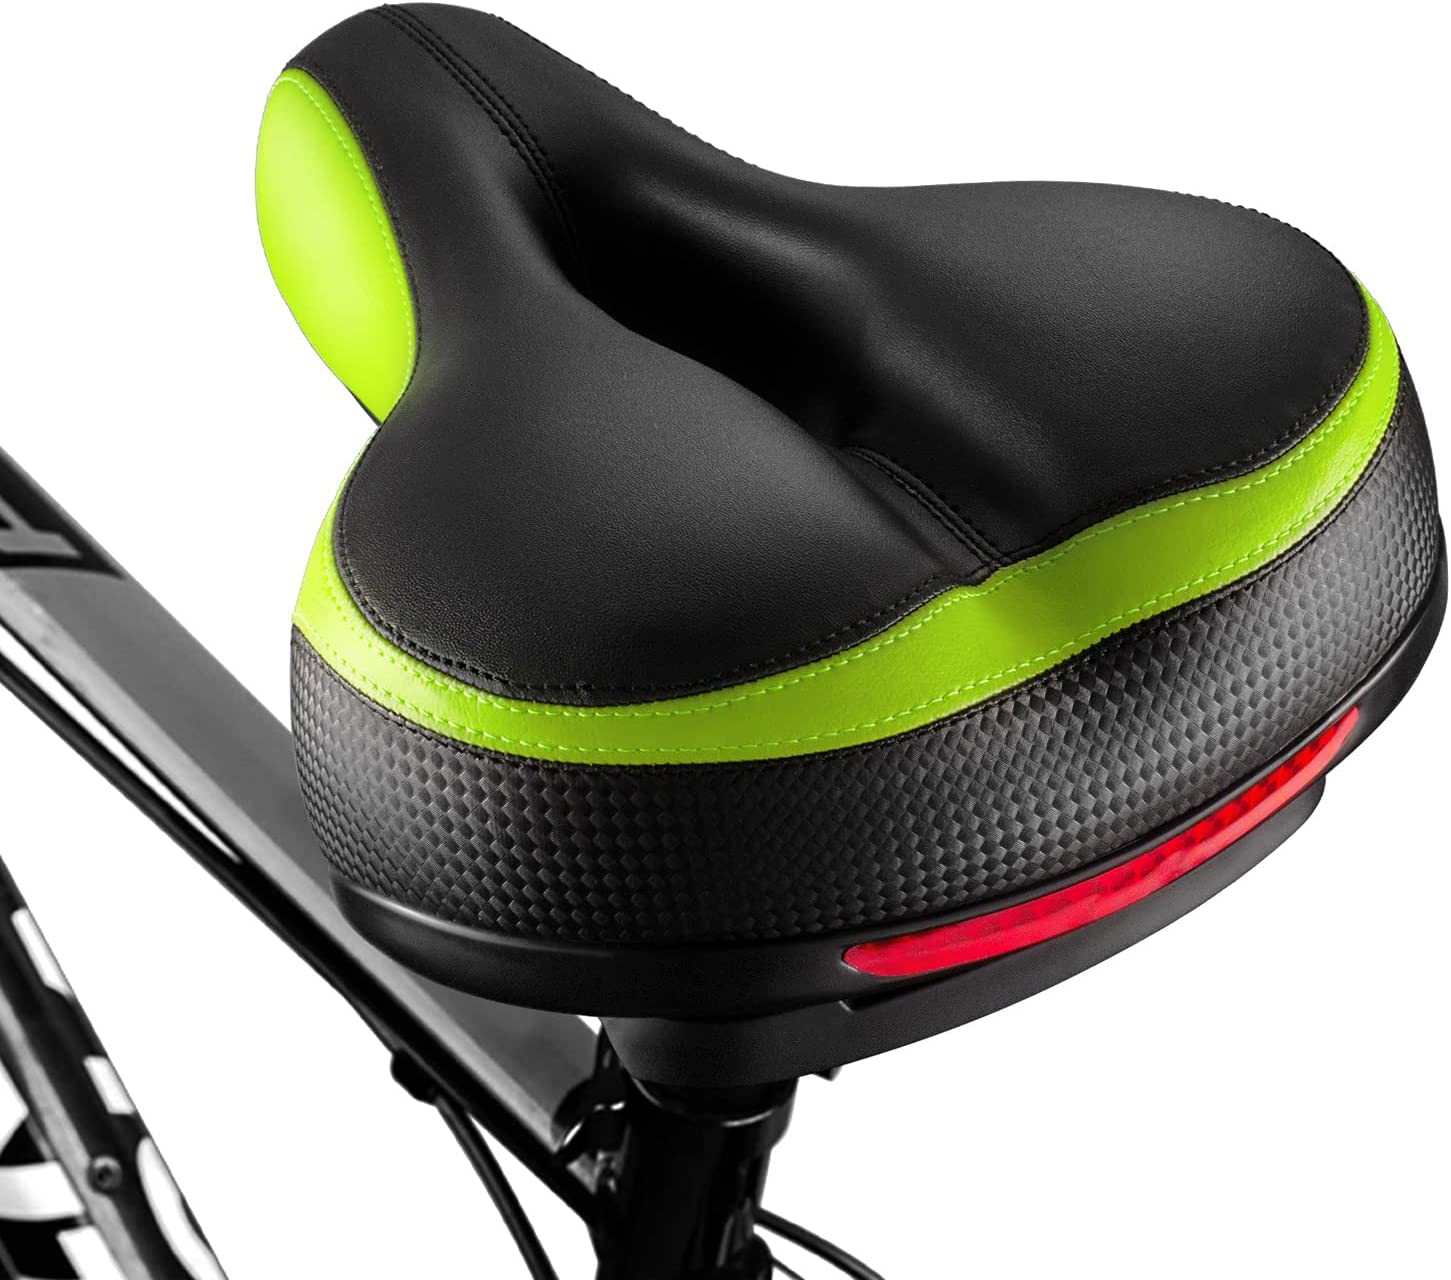 Wider saddles do definitely provide relief for riders experiencing saddle pain when riding a mountain bike.